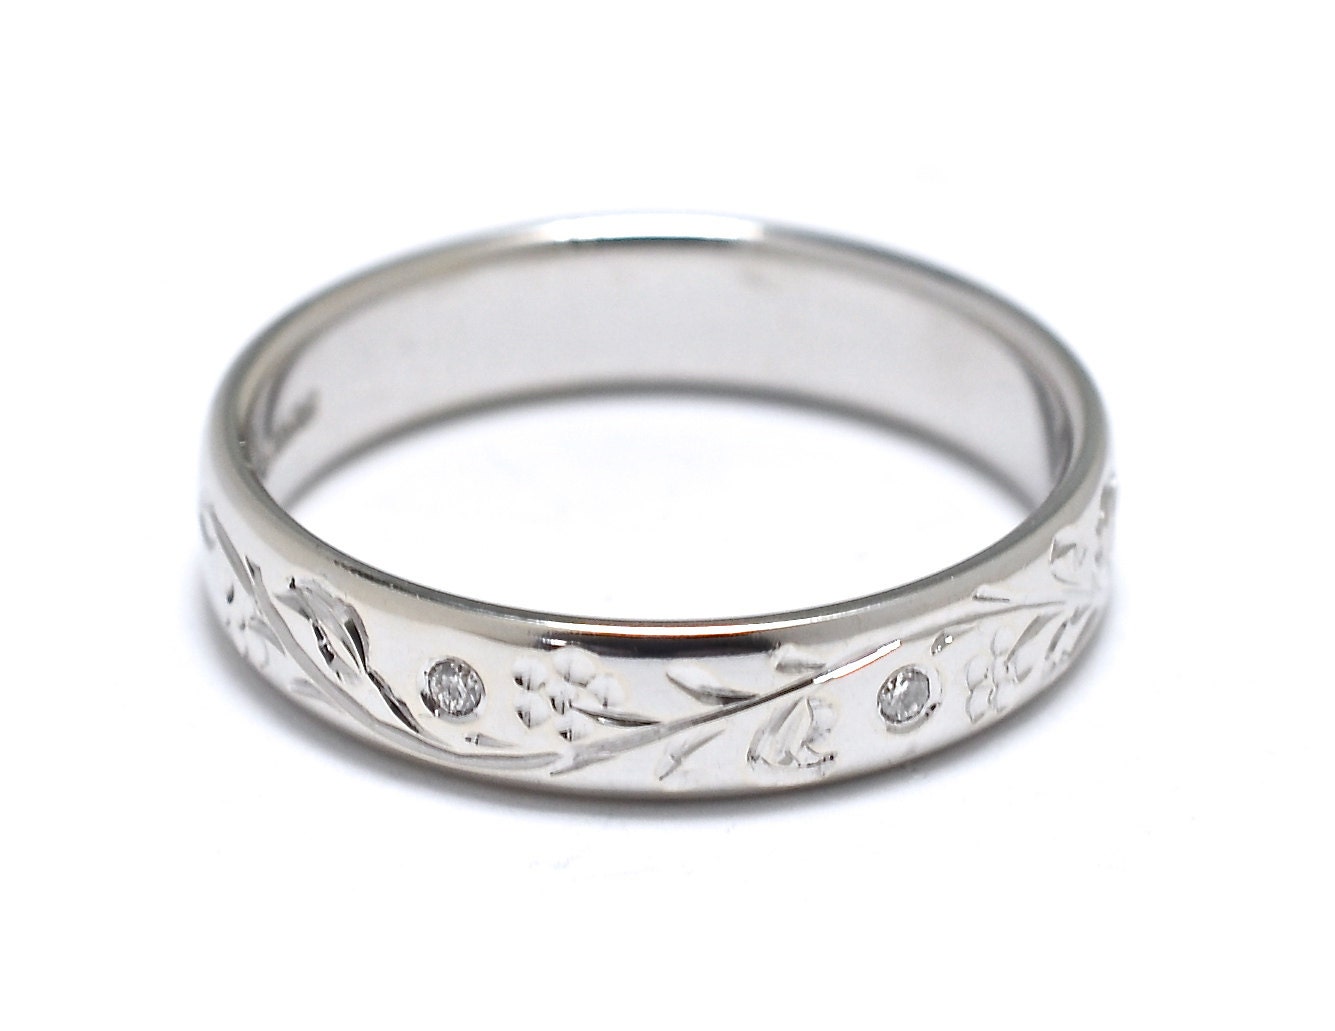 Floral Engraved White Gold Wedding Band Size 7 1/2